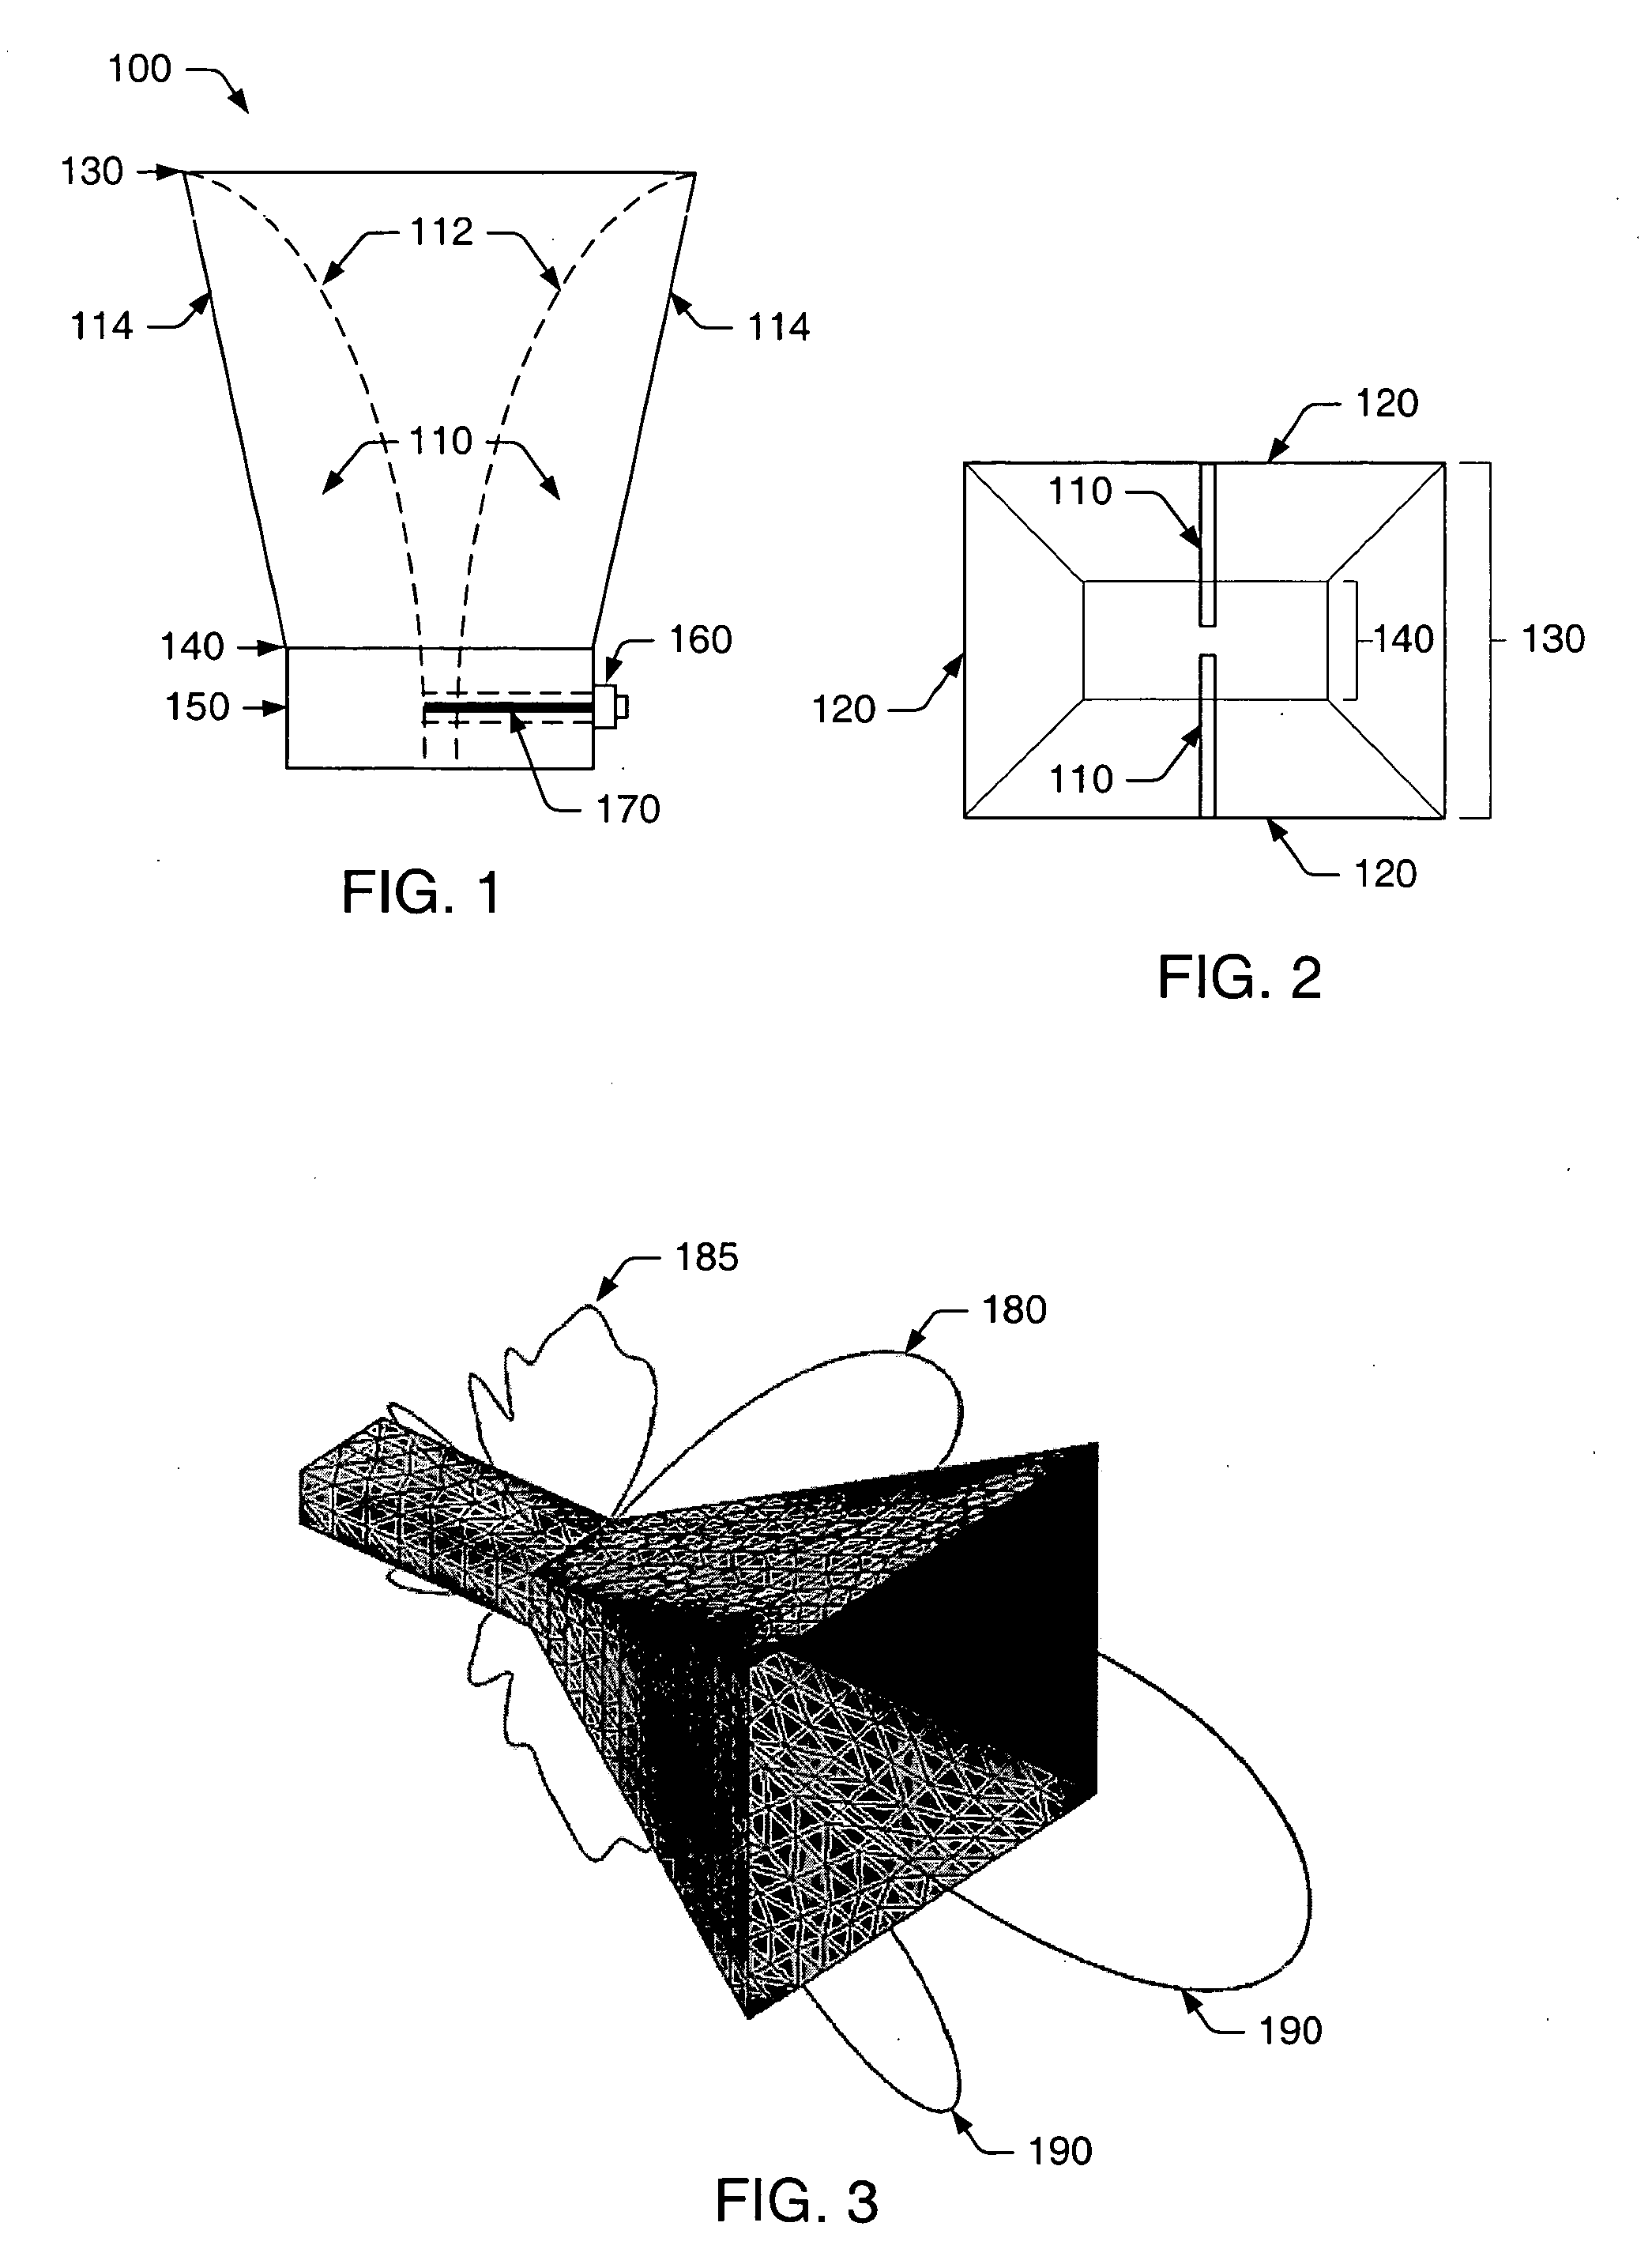 Dual- and quad-ridged horn antenna with improved antenna pattern characteristics